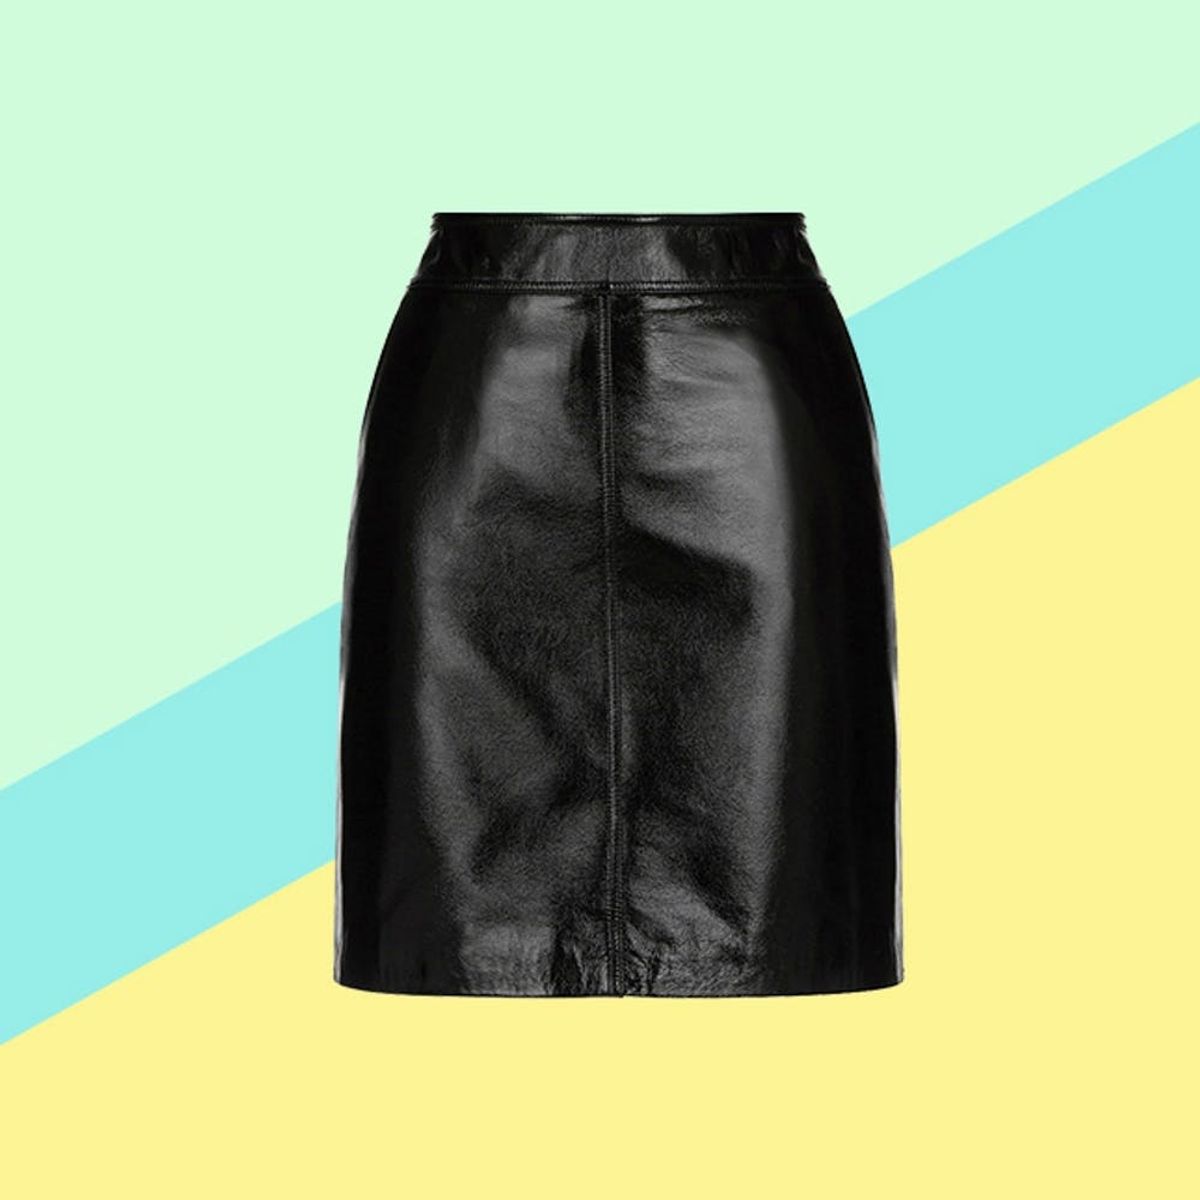 3 Ways to Wear Patent Leather This Season Without Looking Cheesy